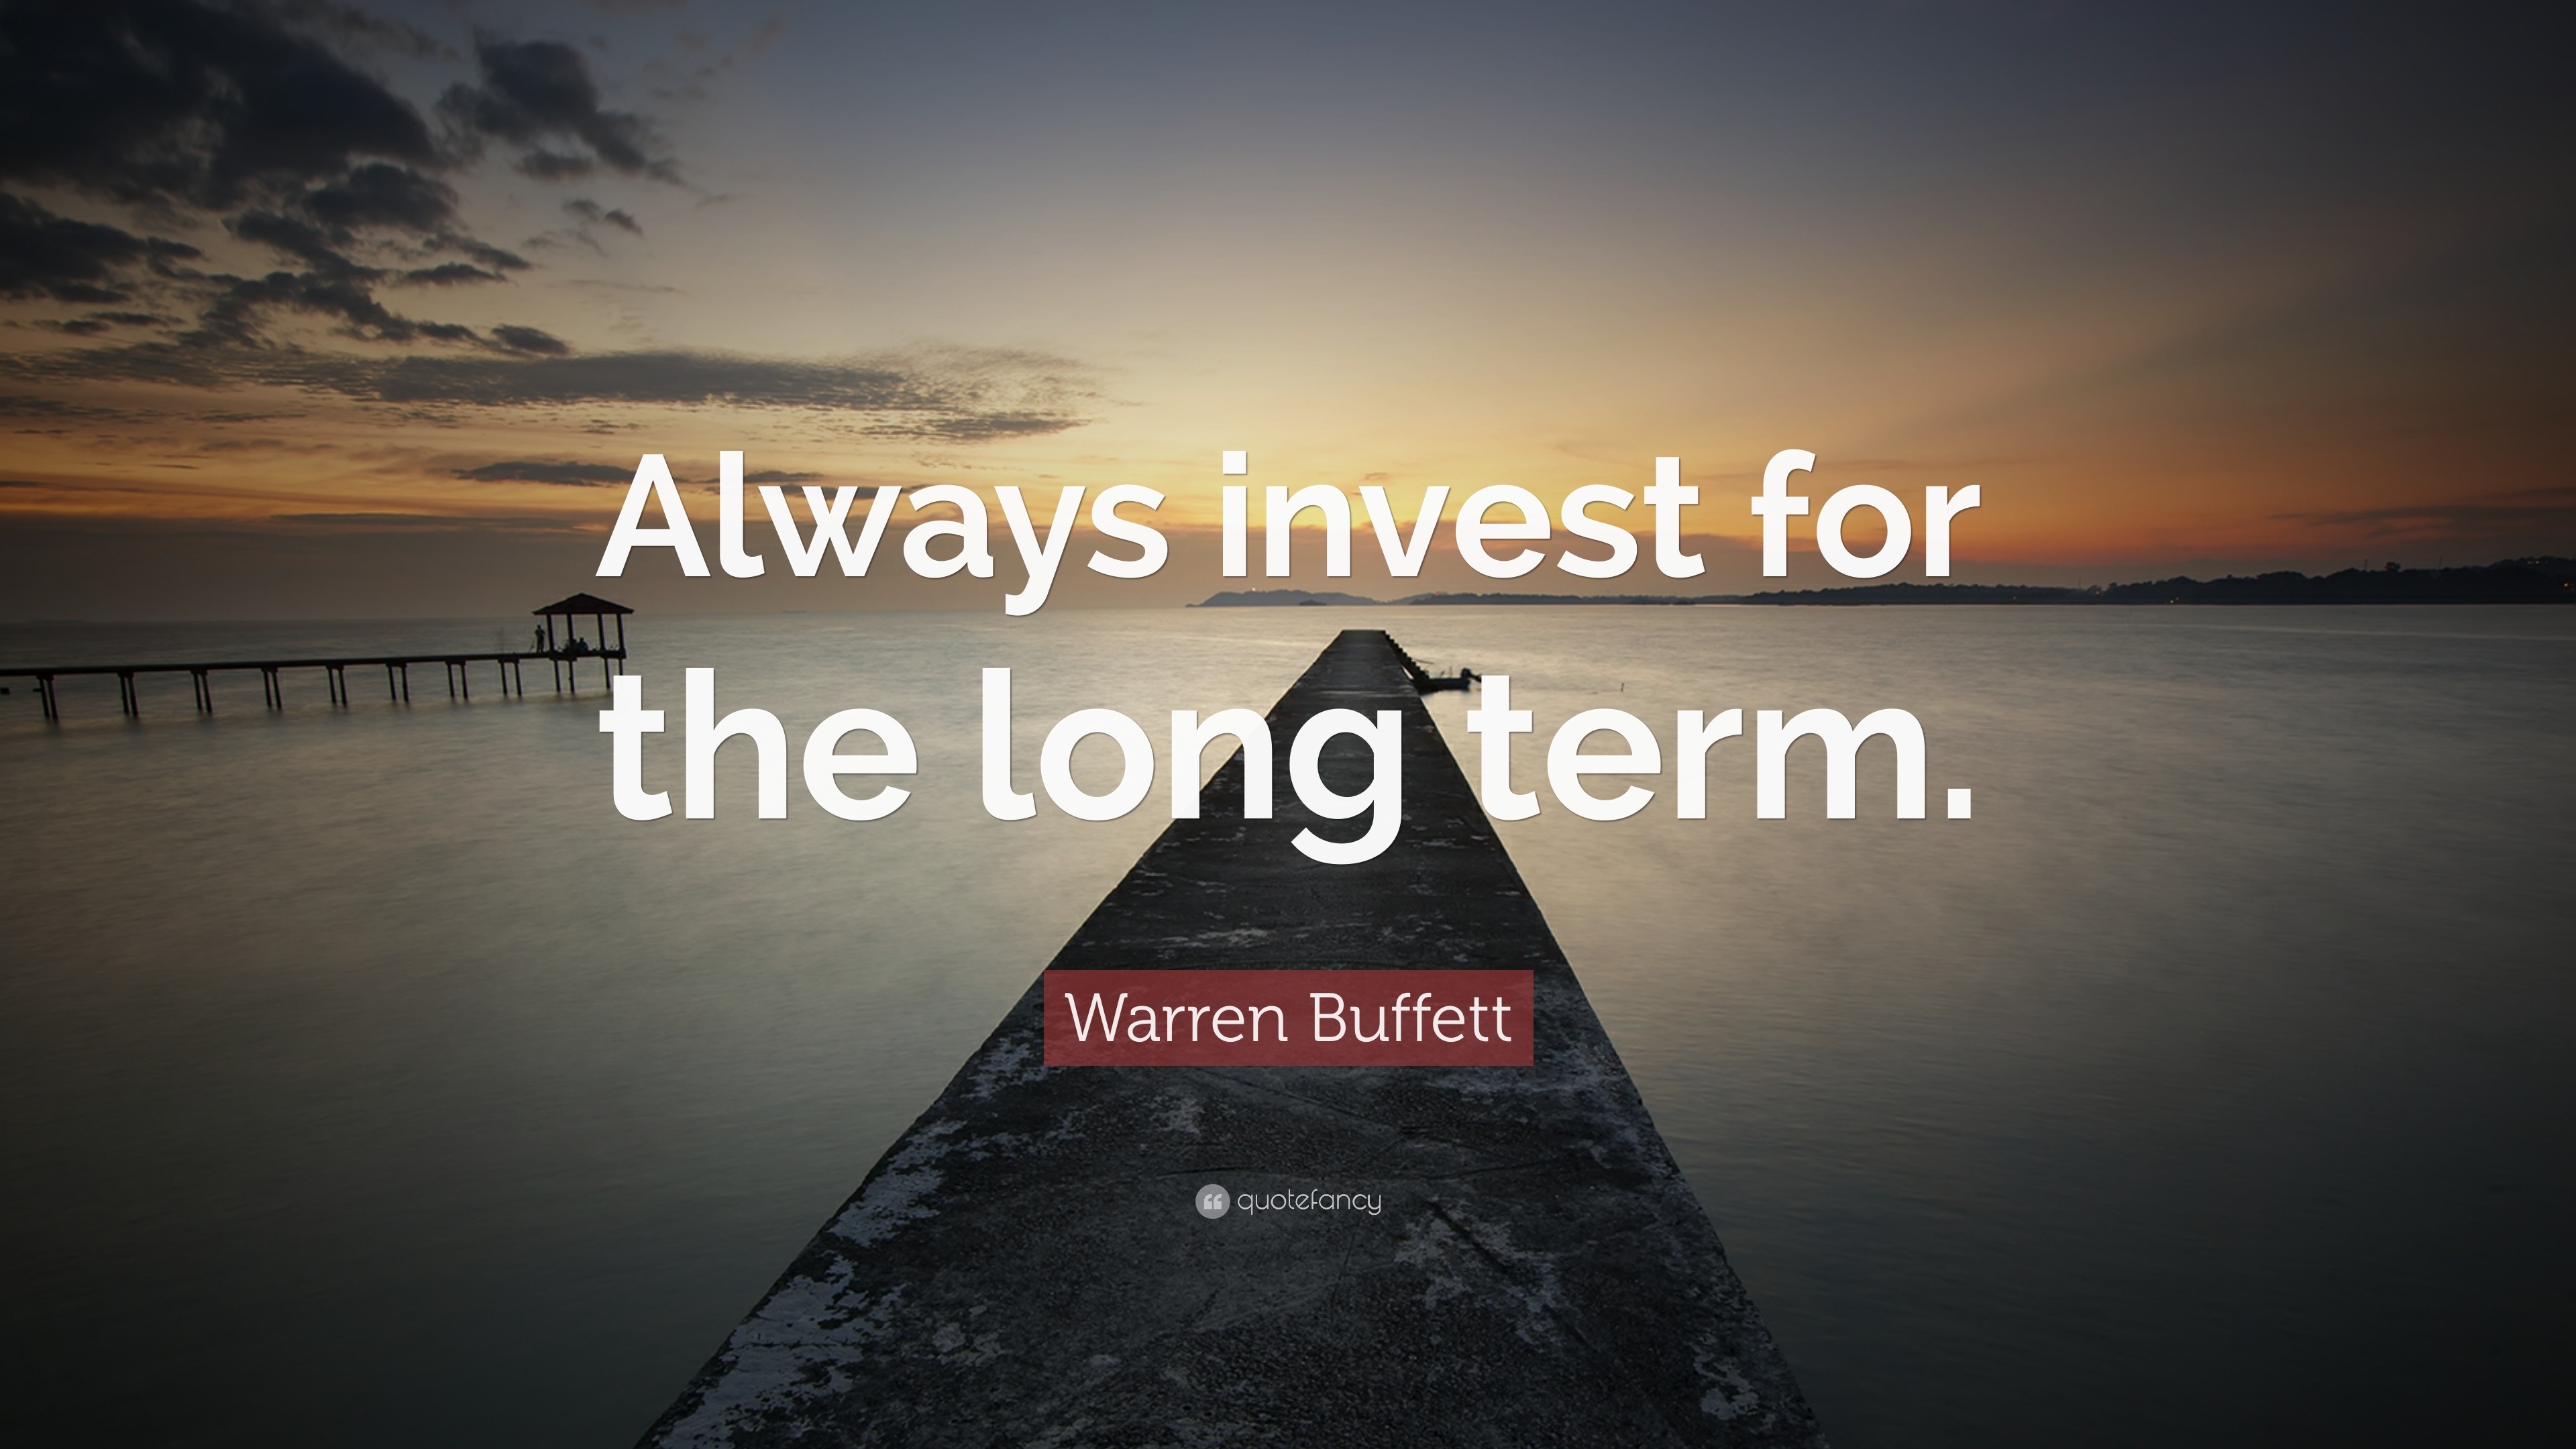 119627 Warren Buffett Quote Always invest for the long term